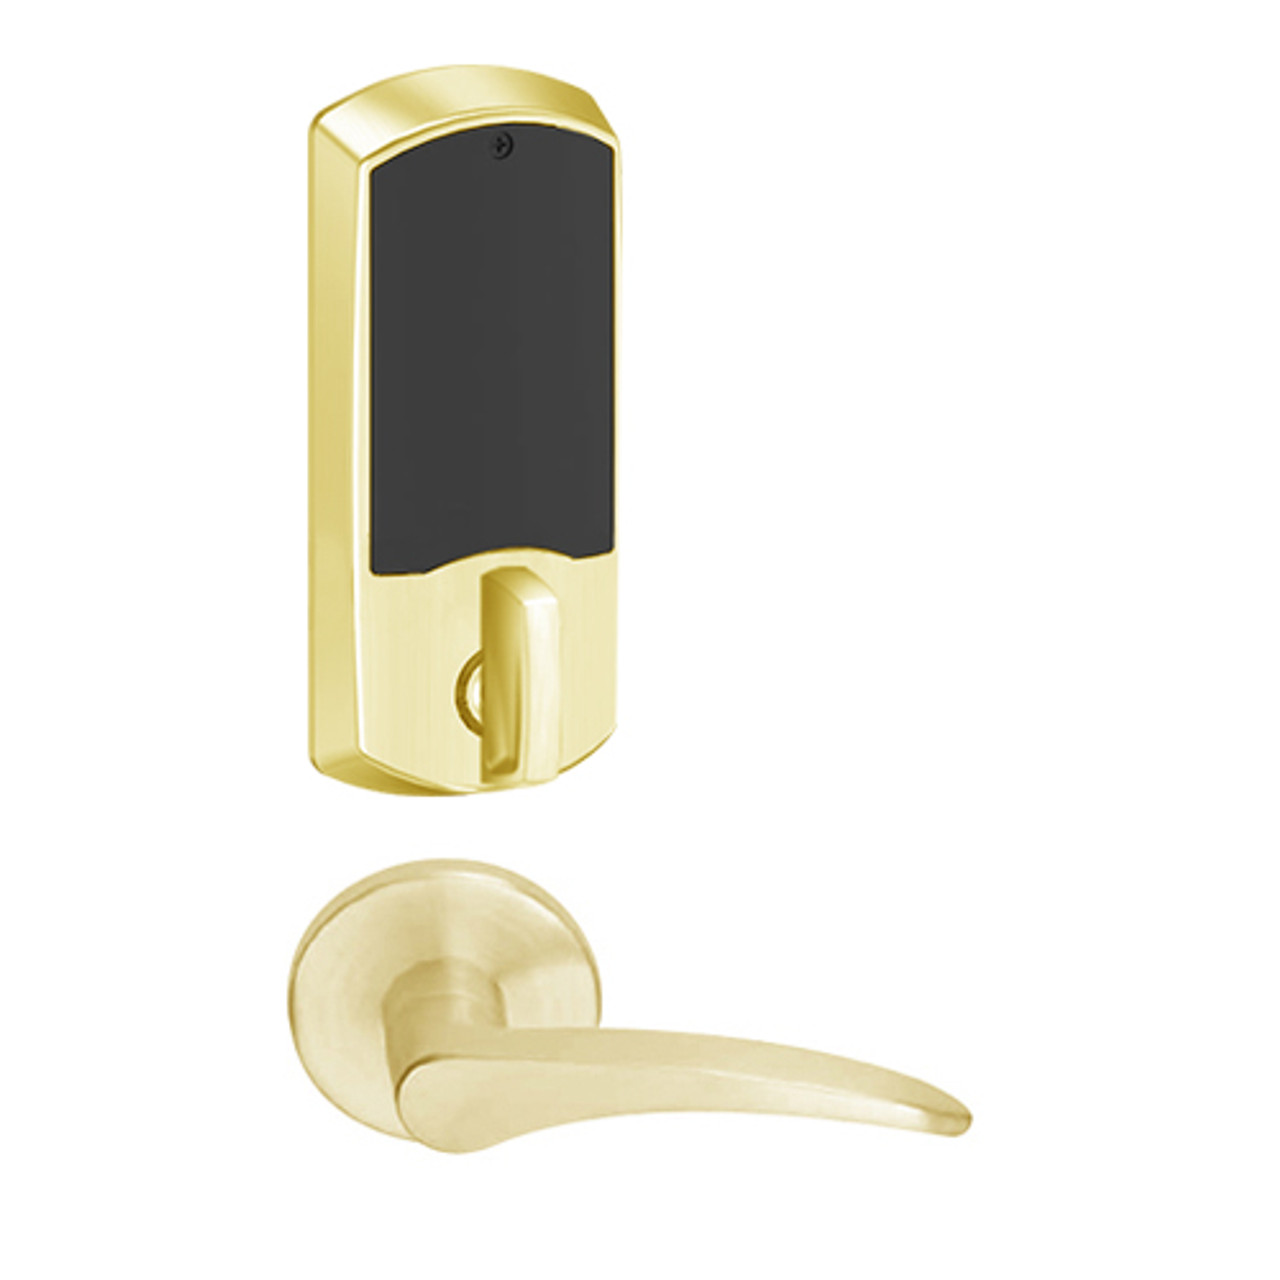 LEMD-GRW-BD-12-605-00A-RH Schlage Privacy/Apartment Wireless Greenwich Mortise Deadbolt Lock with LED and 12 Lever Prepped for SFIC in Bright Brass